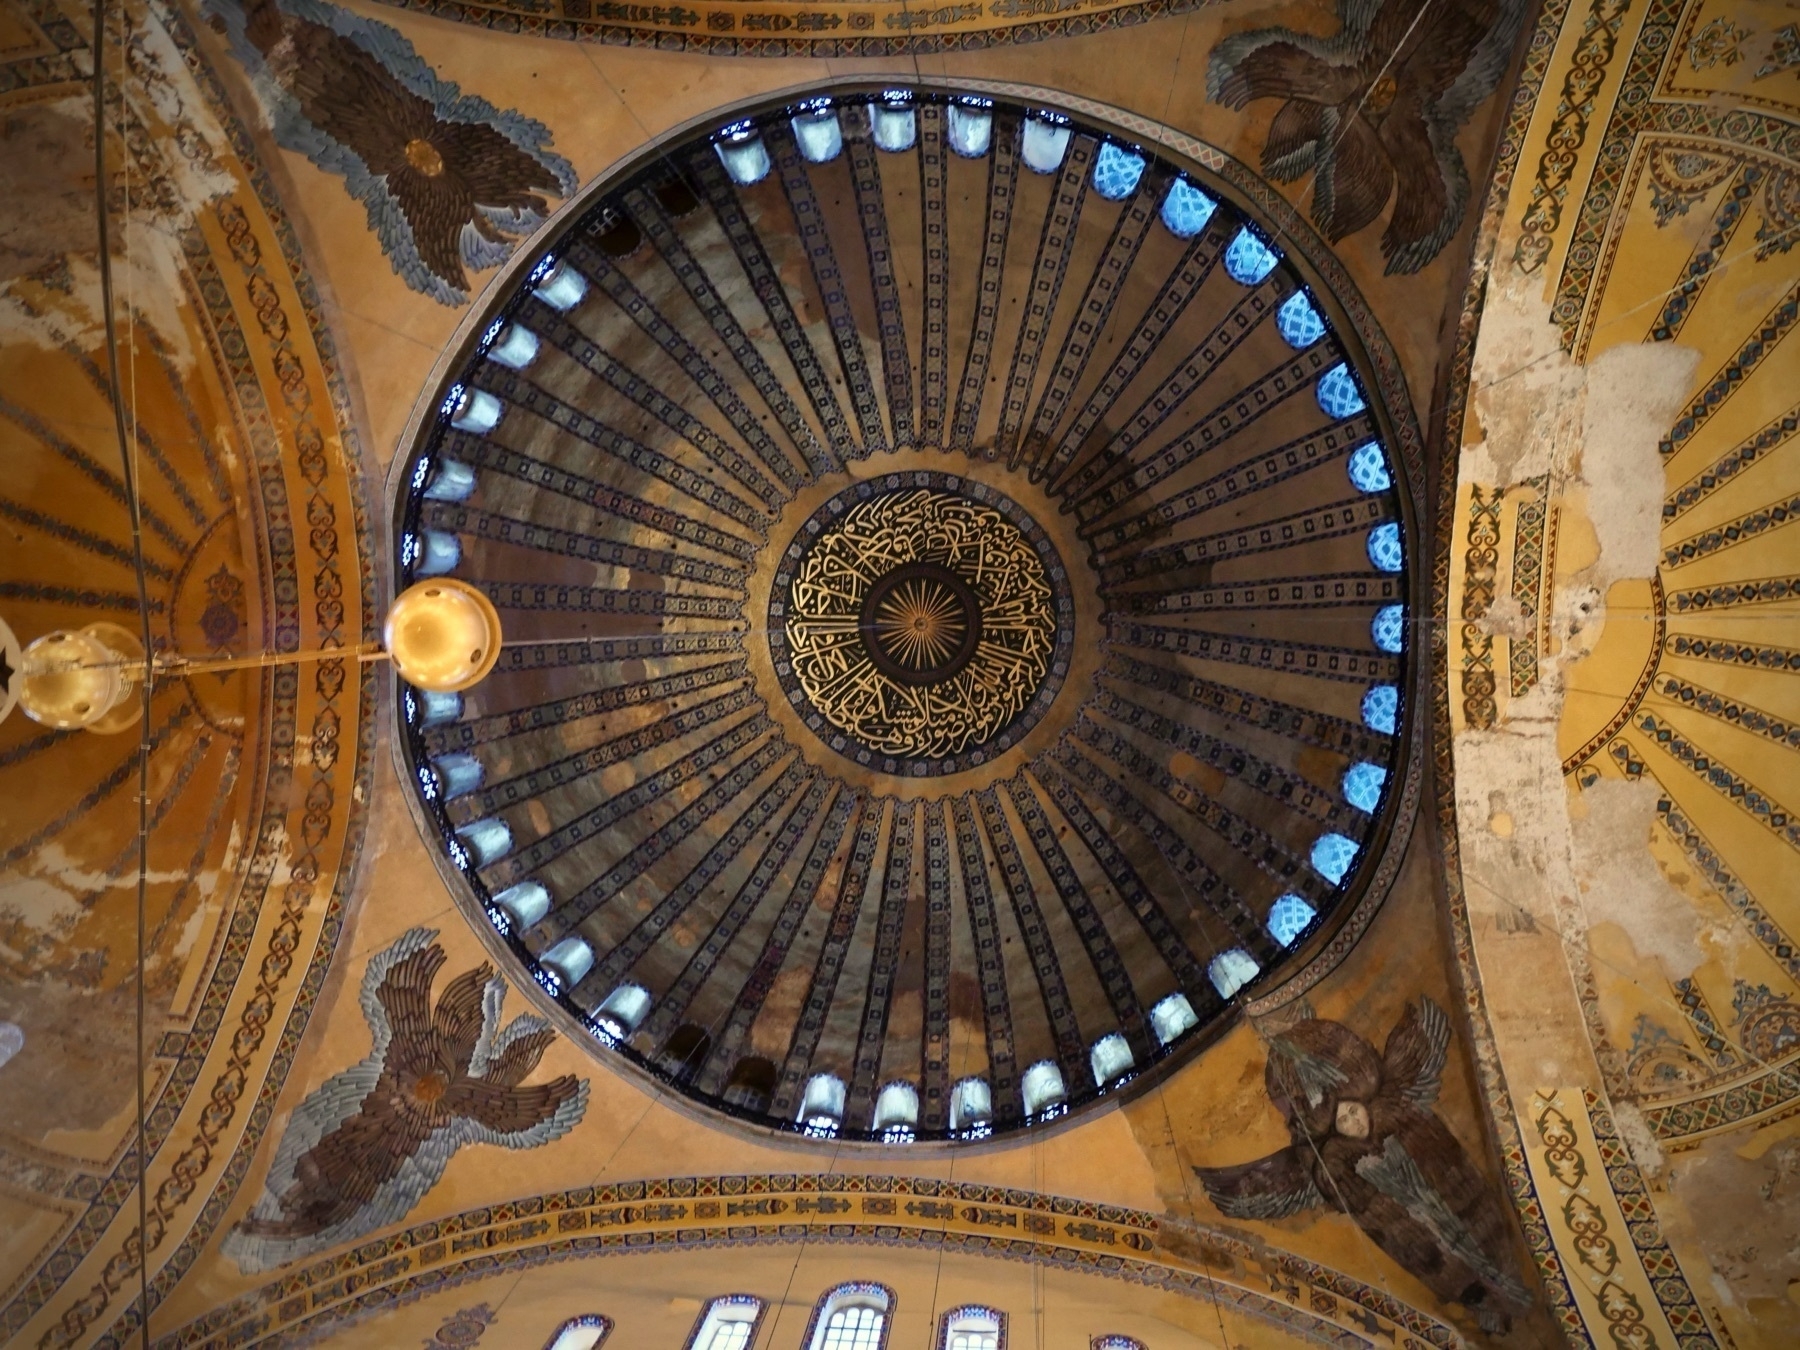 A nearly straight on shot of the underside of the main dome featuring Arabic writing, and surrounding are depictions of four angels